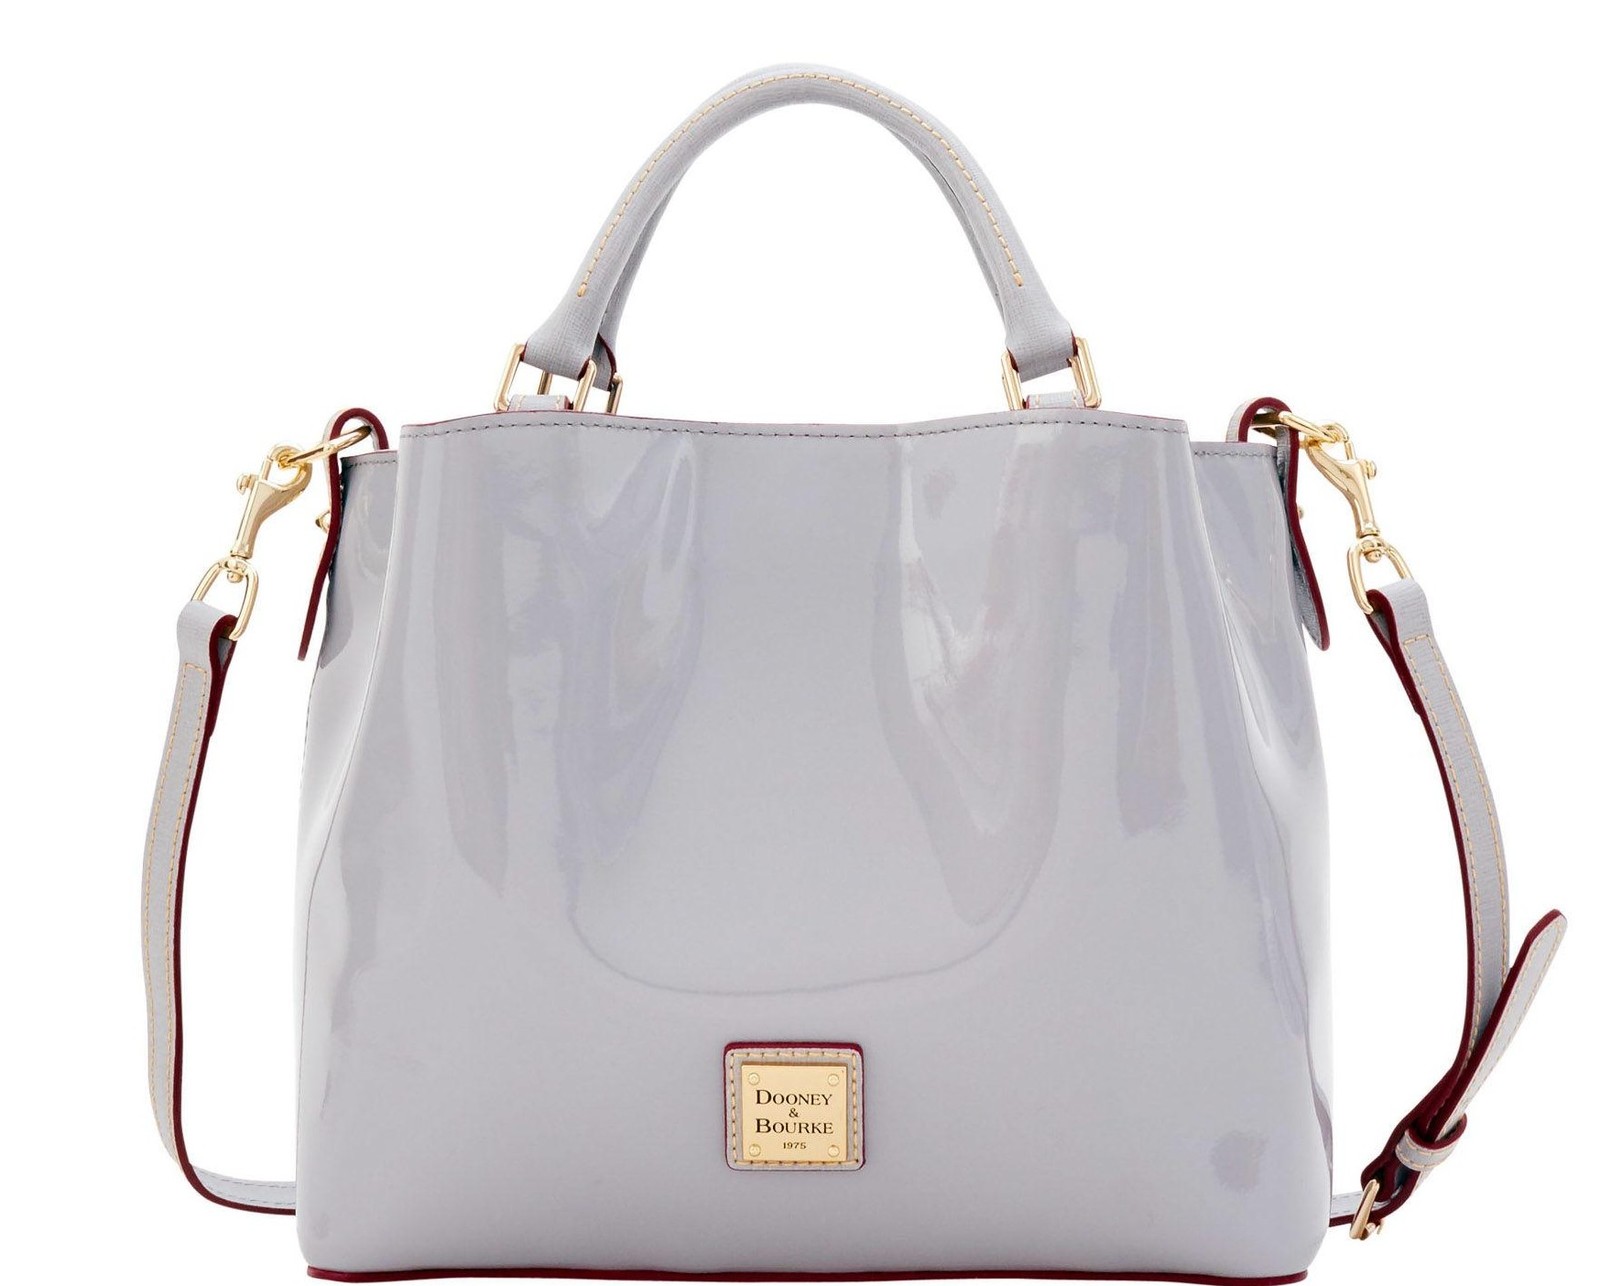 Dooney & Bourke Patent Leather Tote Bags